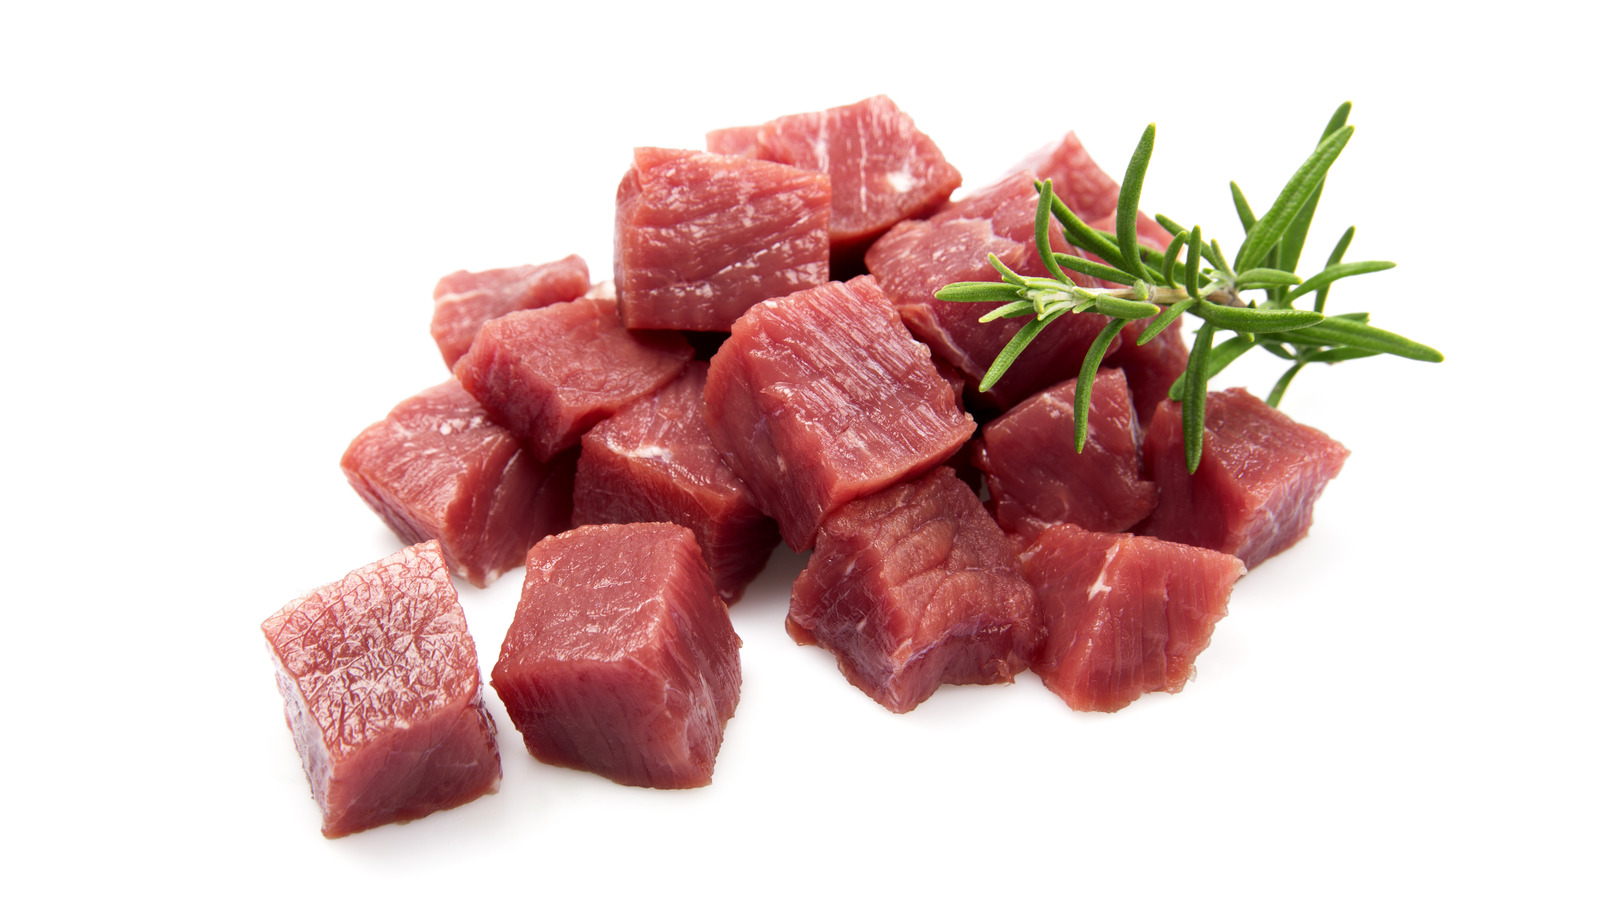 https://www.thedailymeal.com/img/gallery/heres-what-you-need-to-do-if-you-eat-raw-meat-by-mistake/l-intro-1692121900.jpg